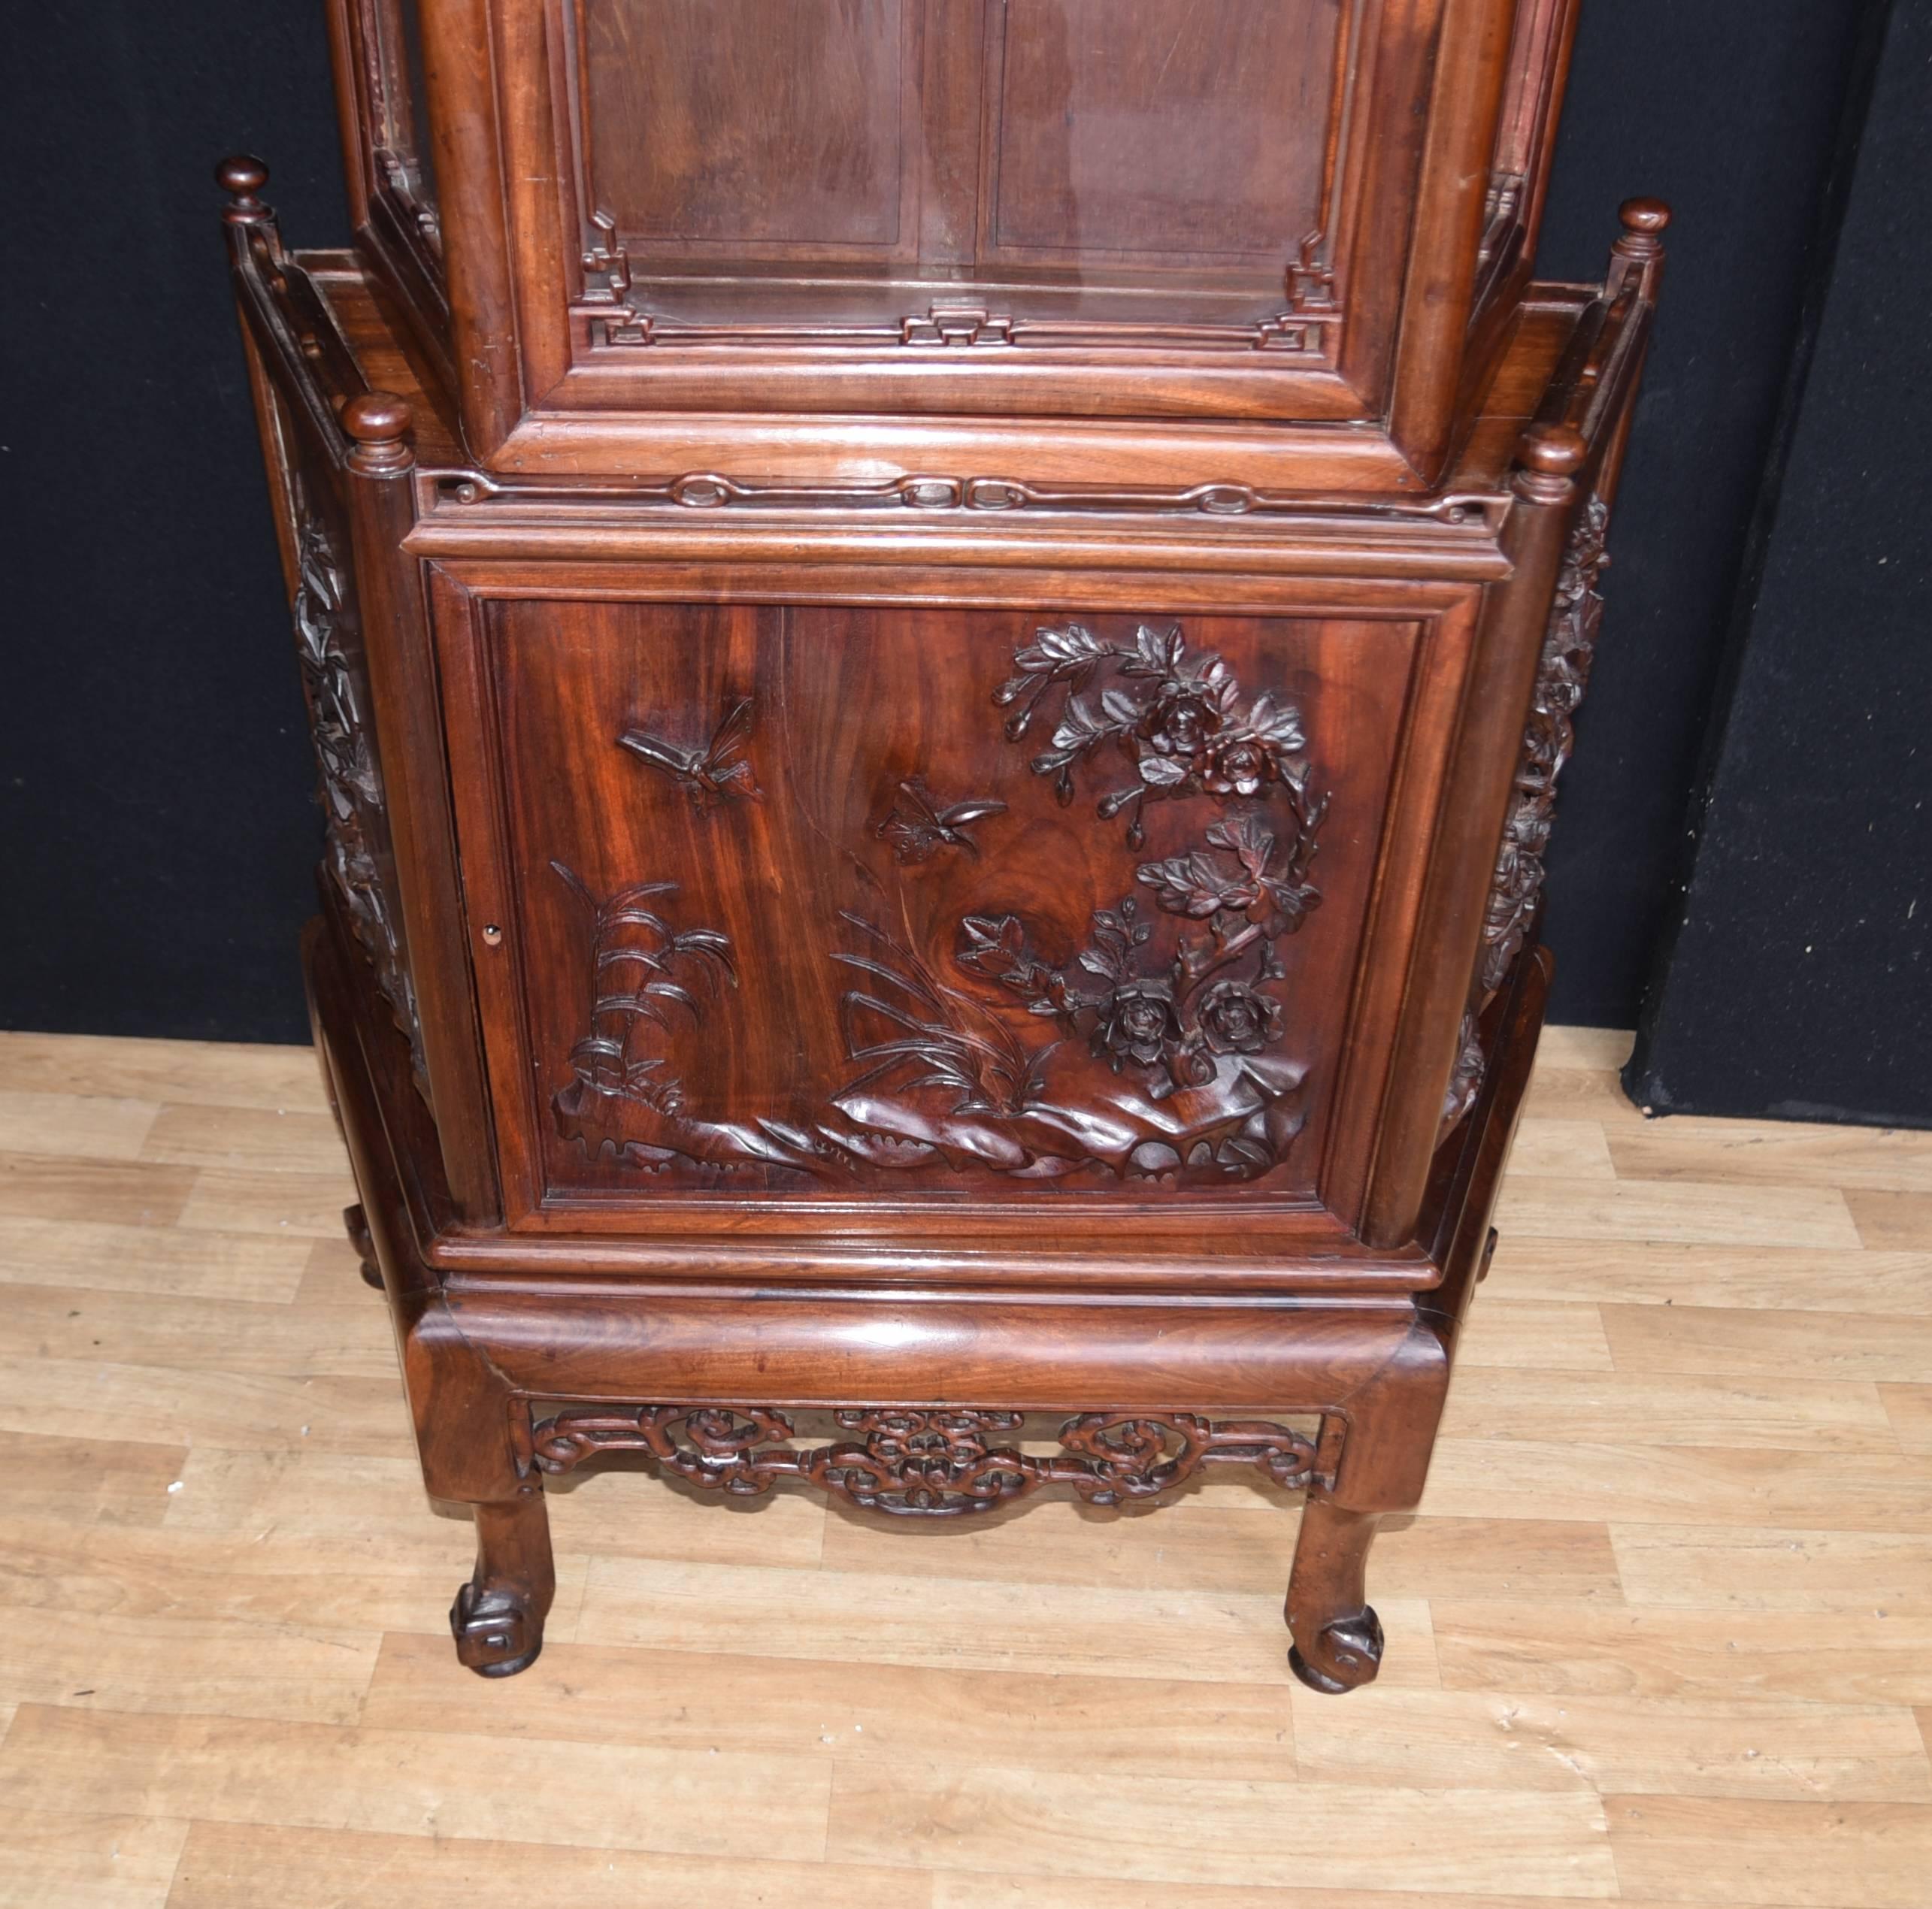 Gorgeous antique Chinese Padauk hardwood display cabinet
Unusual work, our attention was initially drawn to the fact that the carving is deep relief from the solid wood and not applied
Great as a display cabinet or bookcase
Carved details are